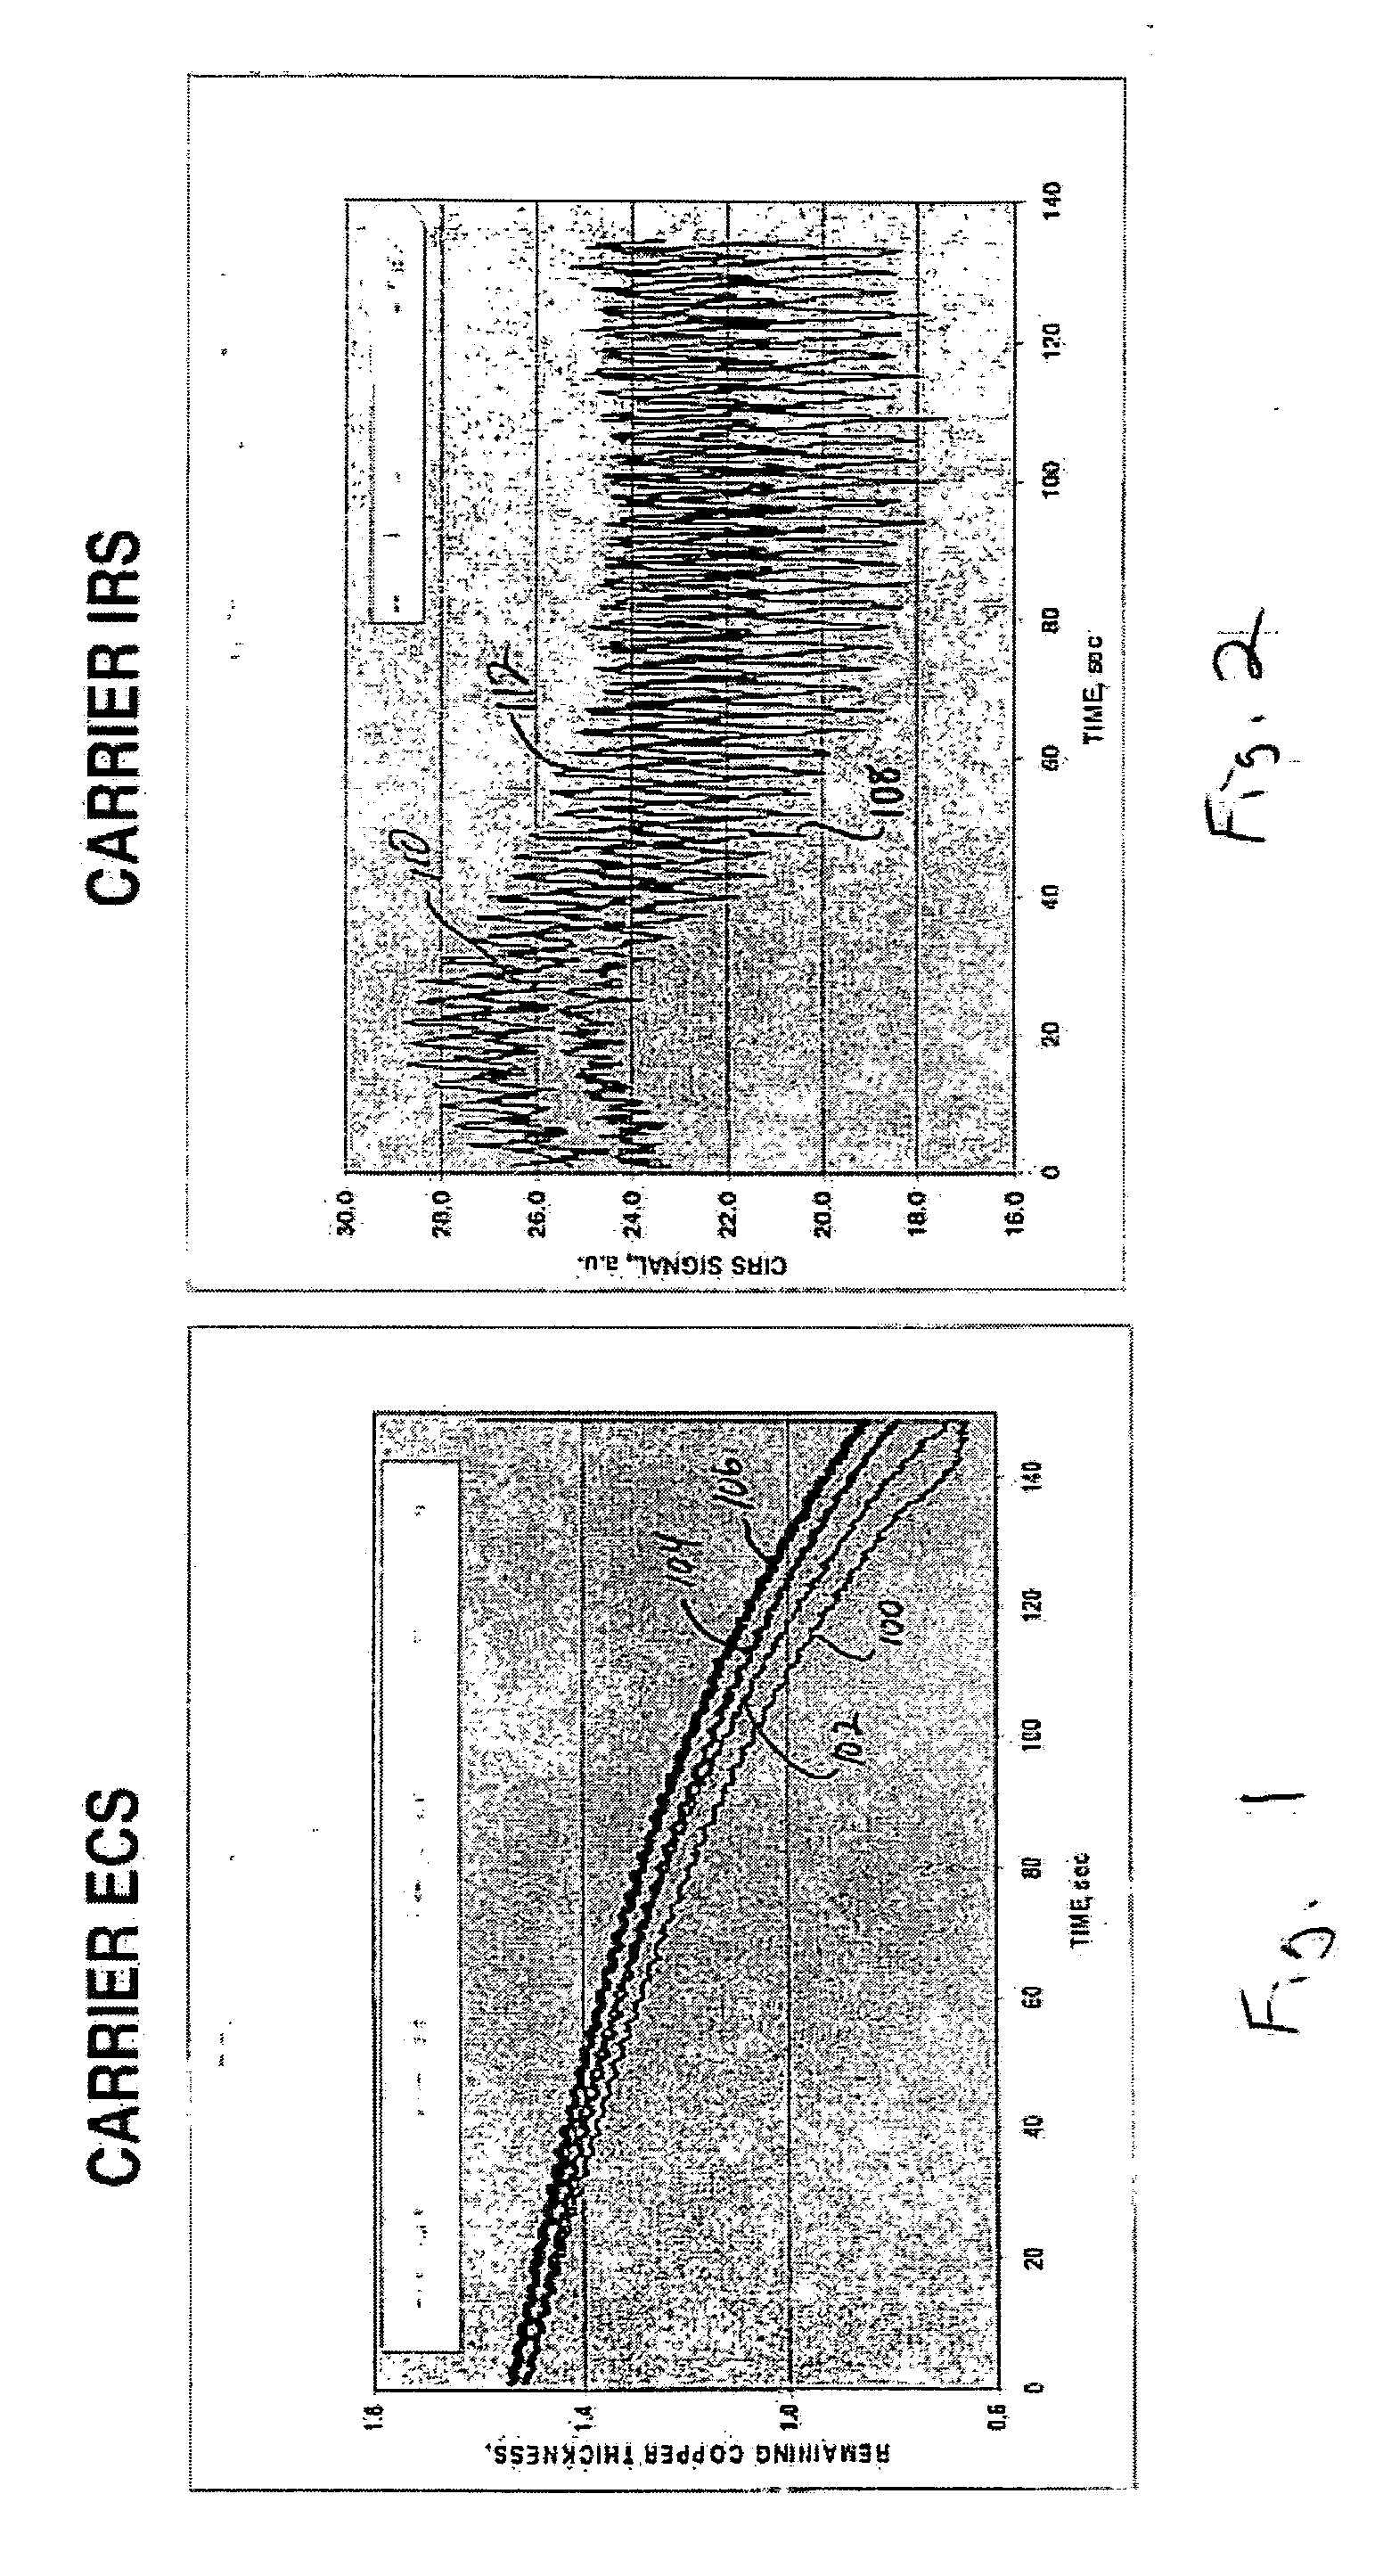 Method and apparatus for wafer mechanical stress monitoring and wafer thermal stress monitoring